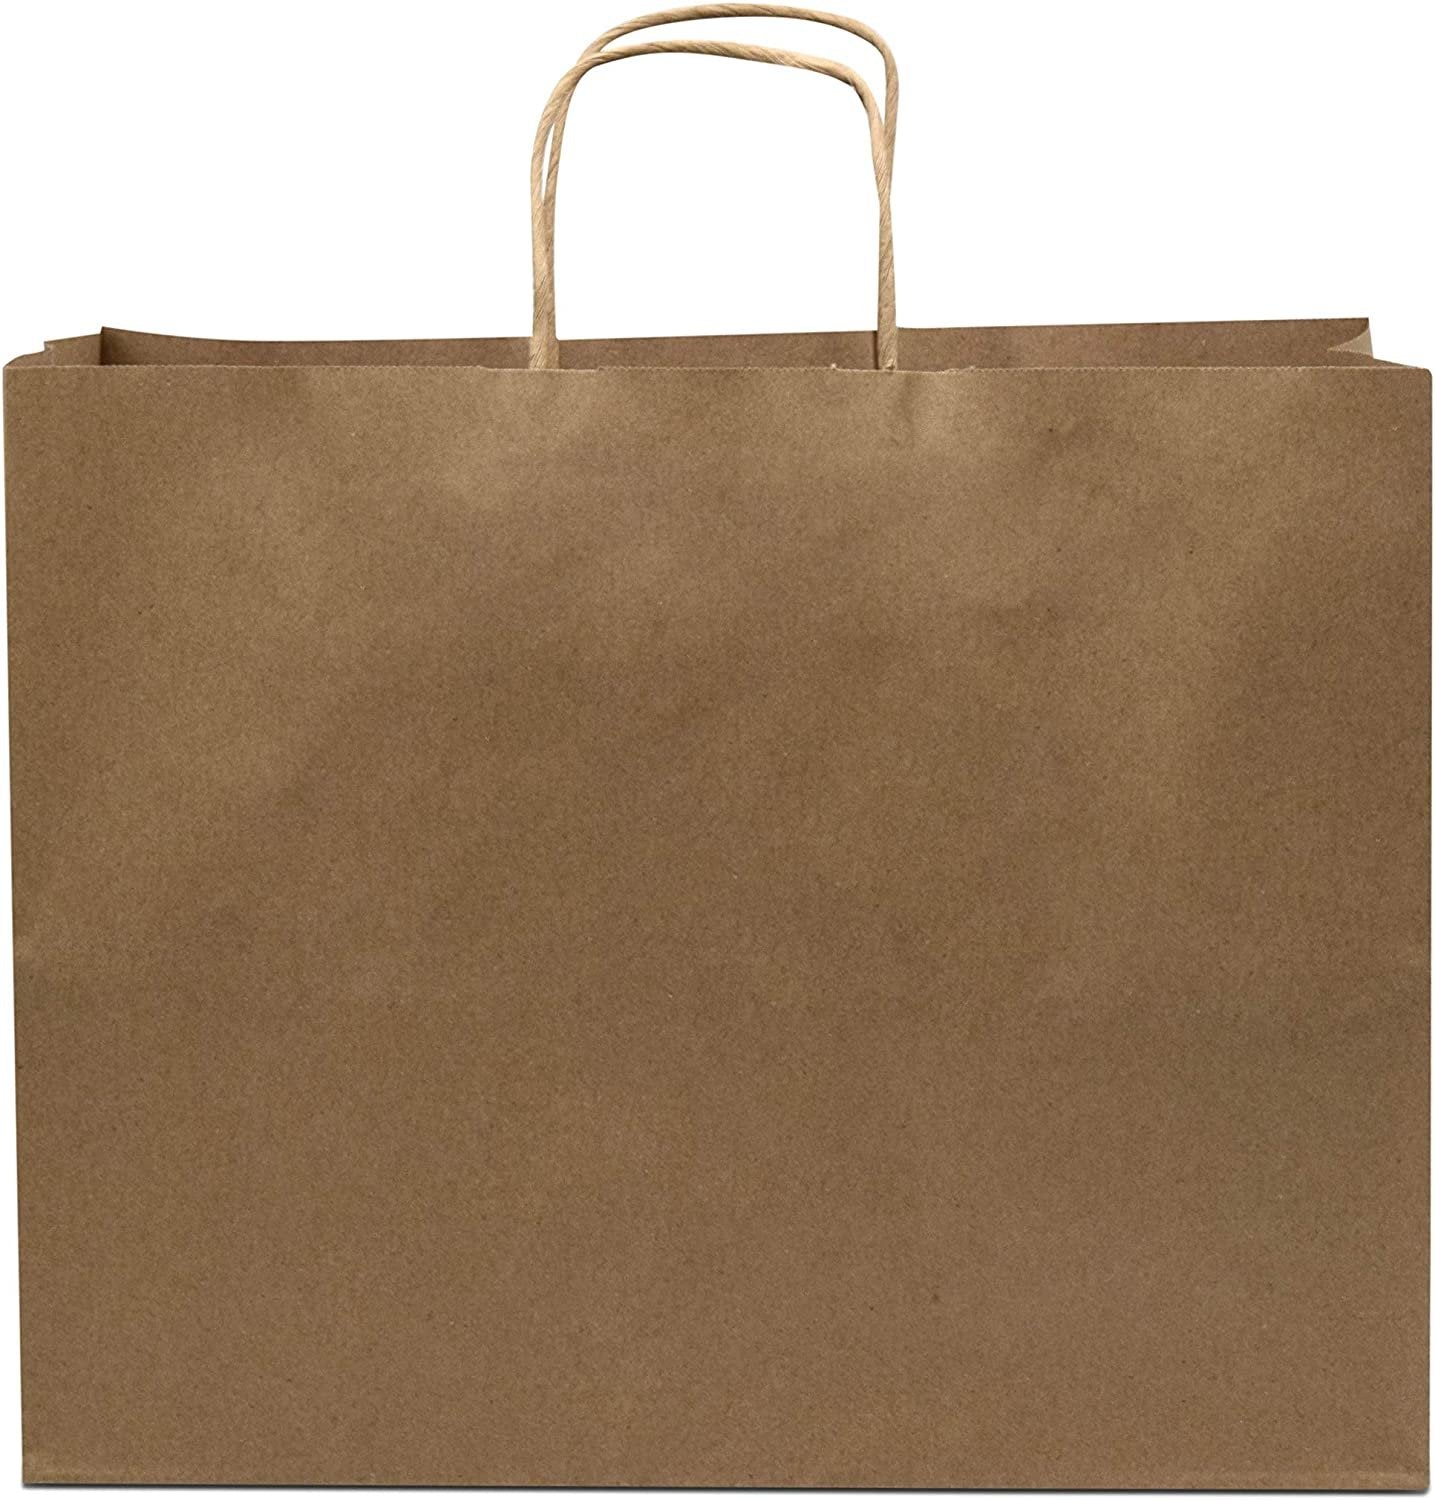 Brown Paper Bags with Handles - 16x6x12 inches 25 Pcs. Paper Shopping Bags, Bulk Gift Bags, Kraft, Party, Favor, Goody, Take-Out, Merchandise, Retail Bags, 80% PCW Vogue Size Large